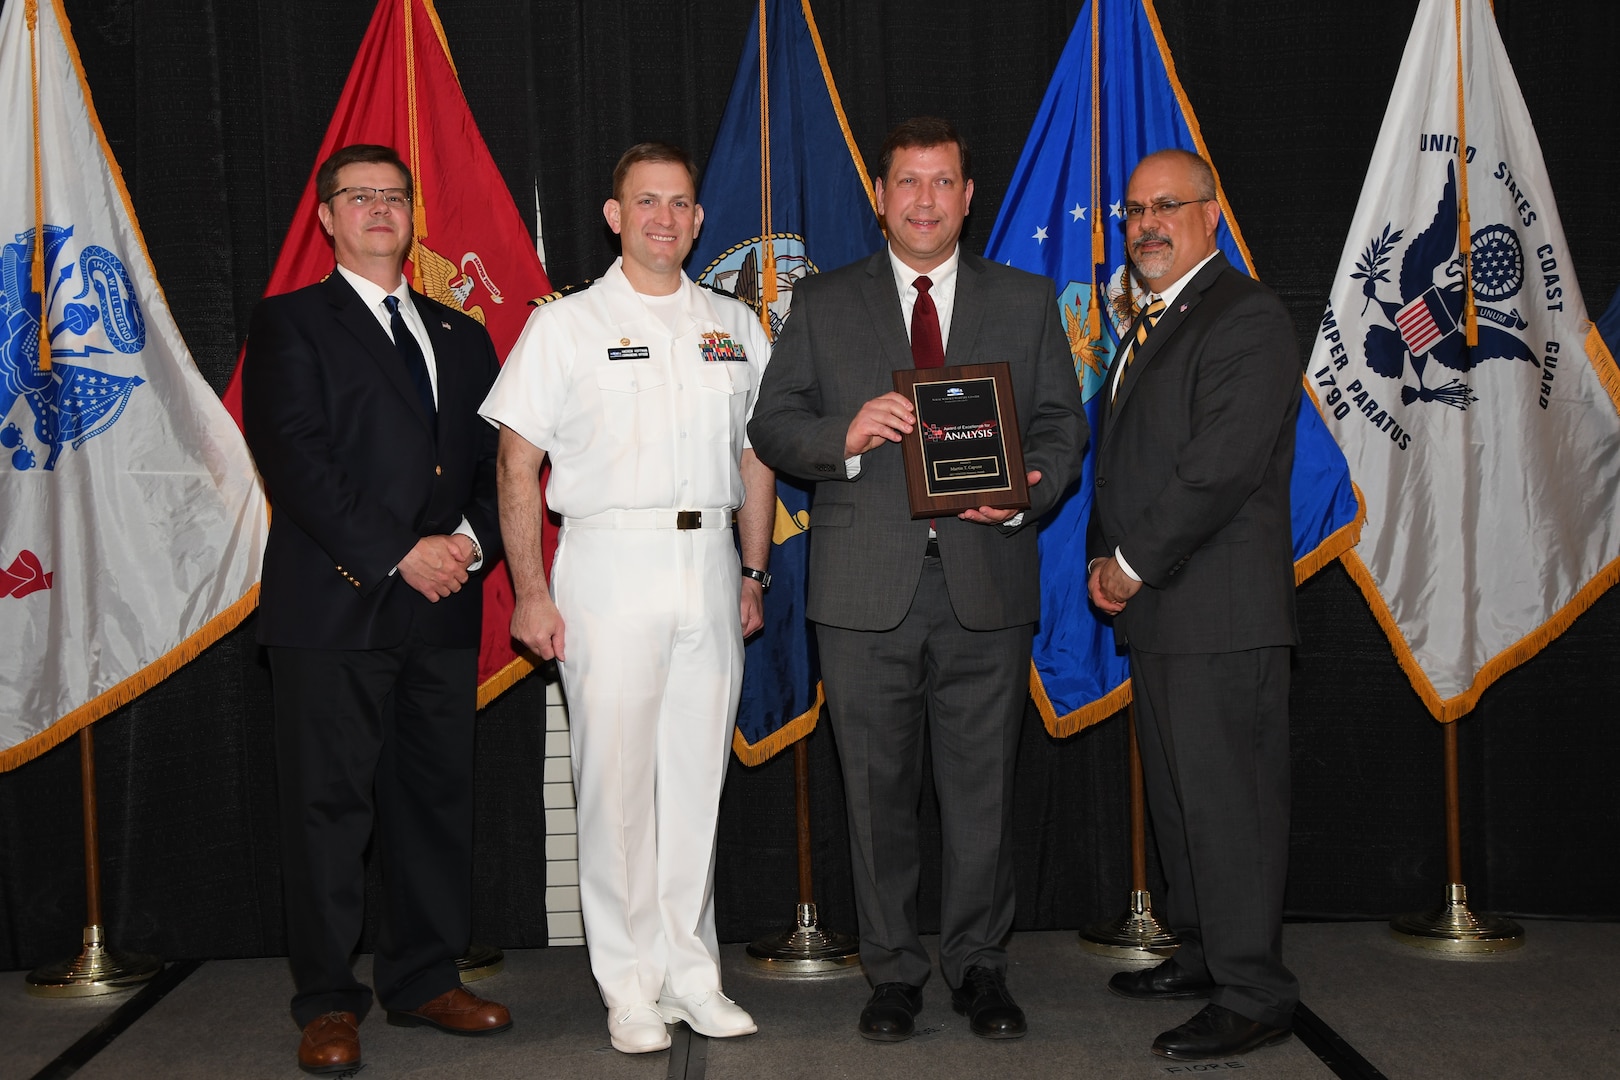 IMAGE: Martin Capone is presented the NSWCDD Award of Excellence for Analysis at Naval Surface Warfare Center Dahlgren Division's annual awards ceremony, Apr. 26 at the Fredericksburg Expo and Conference Center.

The NSWCDD Award of Excellence for Analysis is newly established to recognize individuals who have made a notable and significant impact to NSWCDD through their outstanding performance in analysis - warfare, design, engineering, modeling and simulation.